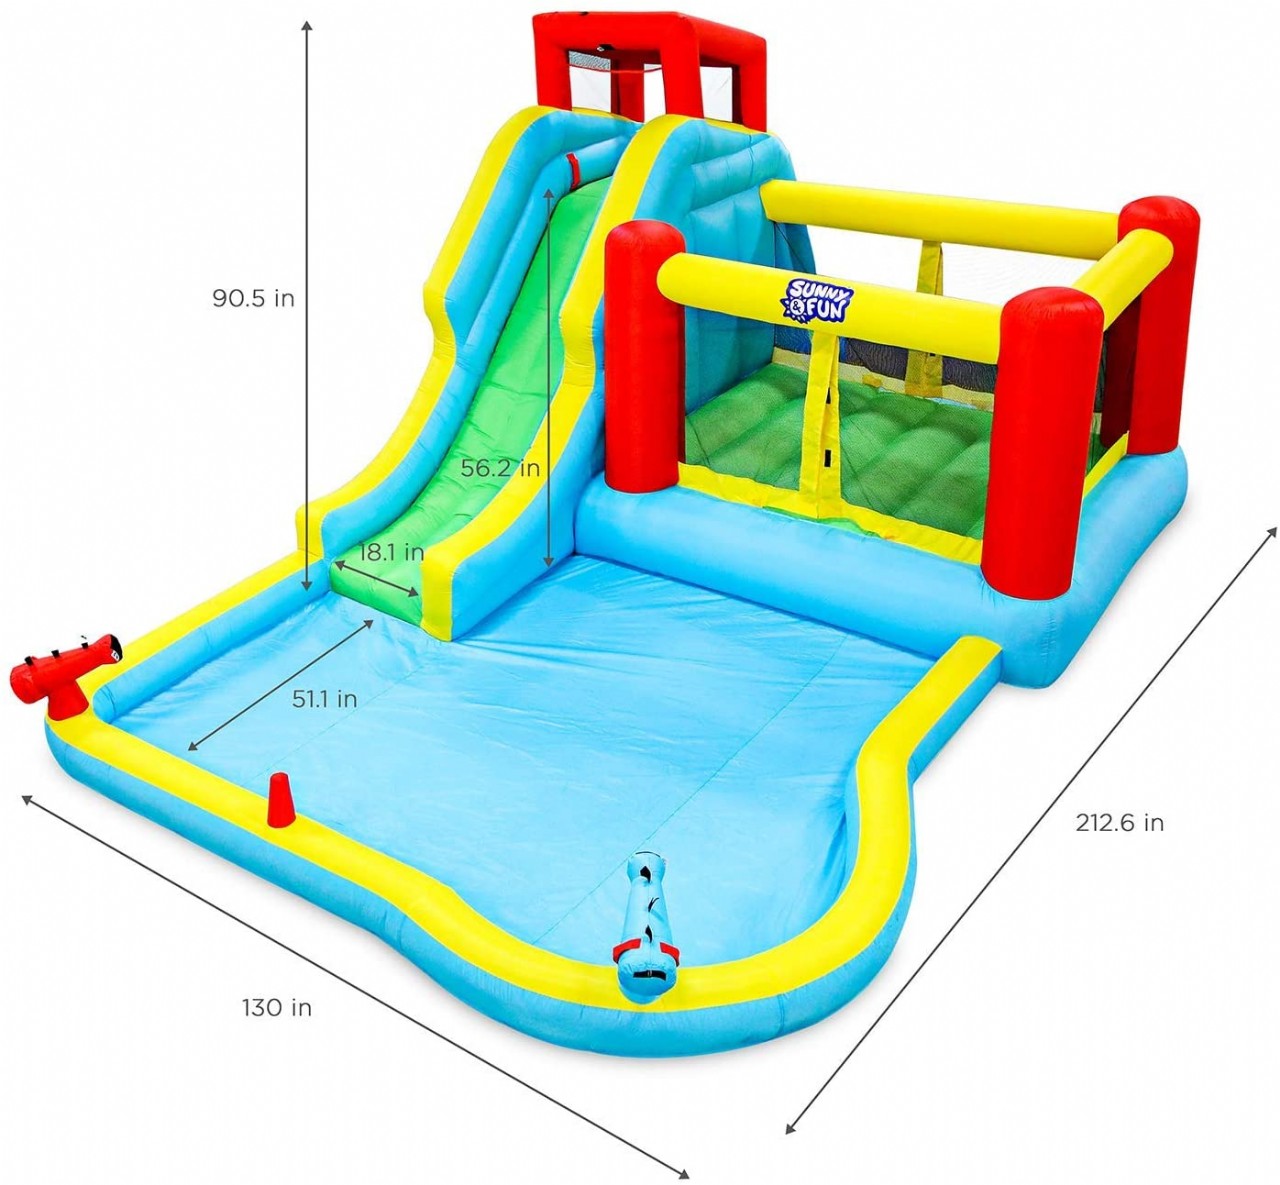 Deluxe Inflatable Water Slide Park – Heavy-Duty Nylon Bounce House for Outdoor Fun - Climbing Wall